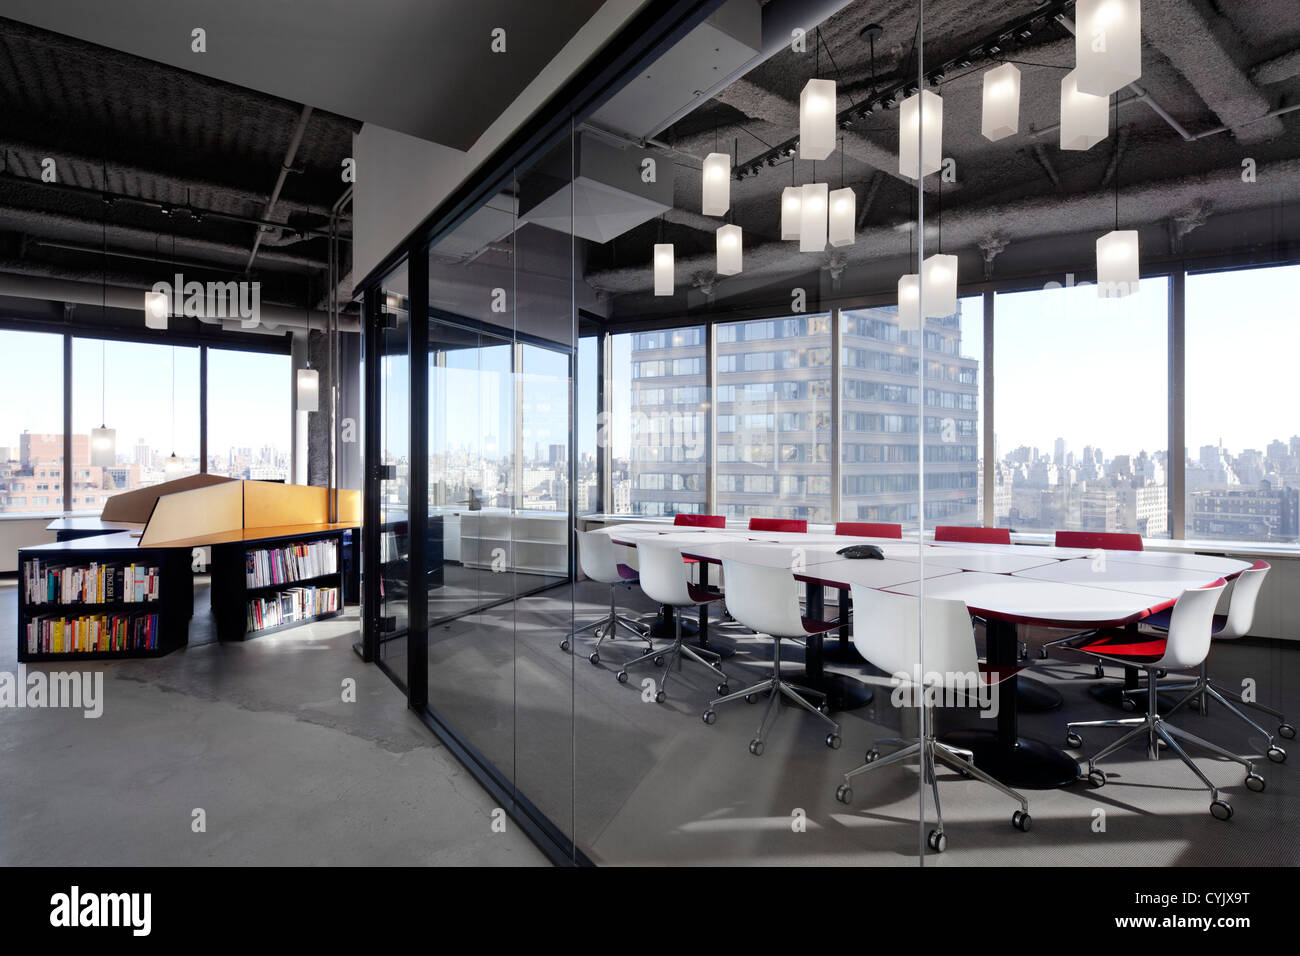 Private office, New York, United States. Architect: Bade Stageberg Cox, 2012. Custom desks, hanging light fixtures, conference r Stock Photo